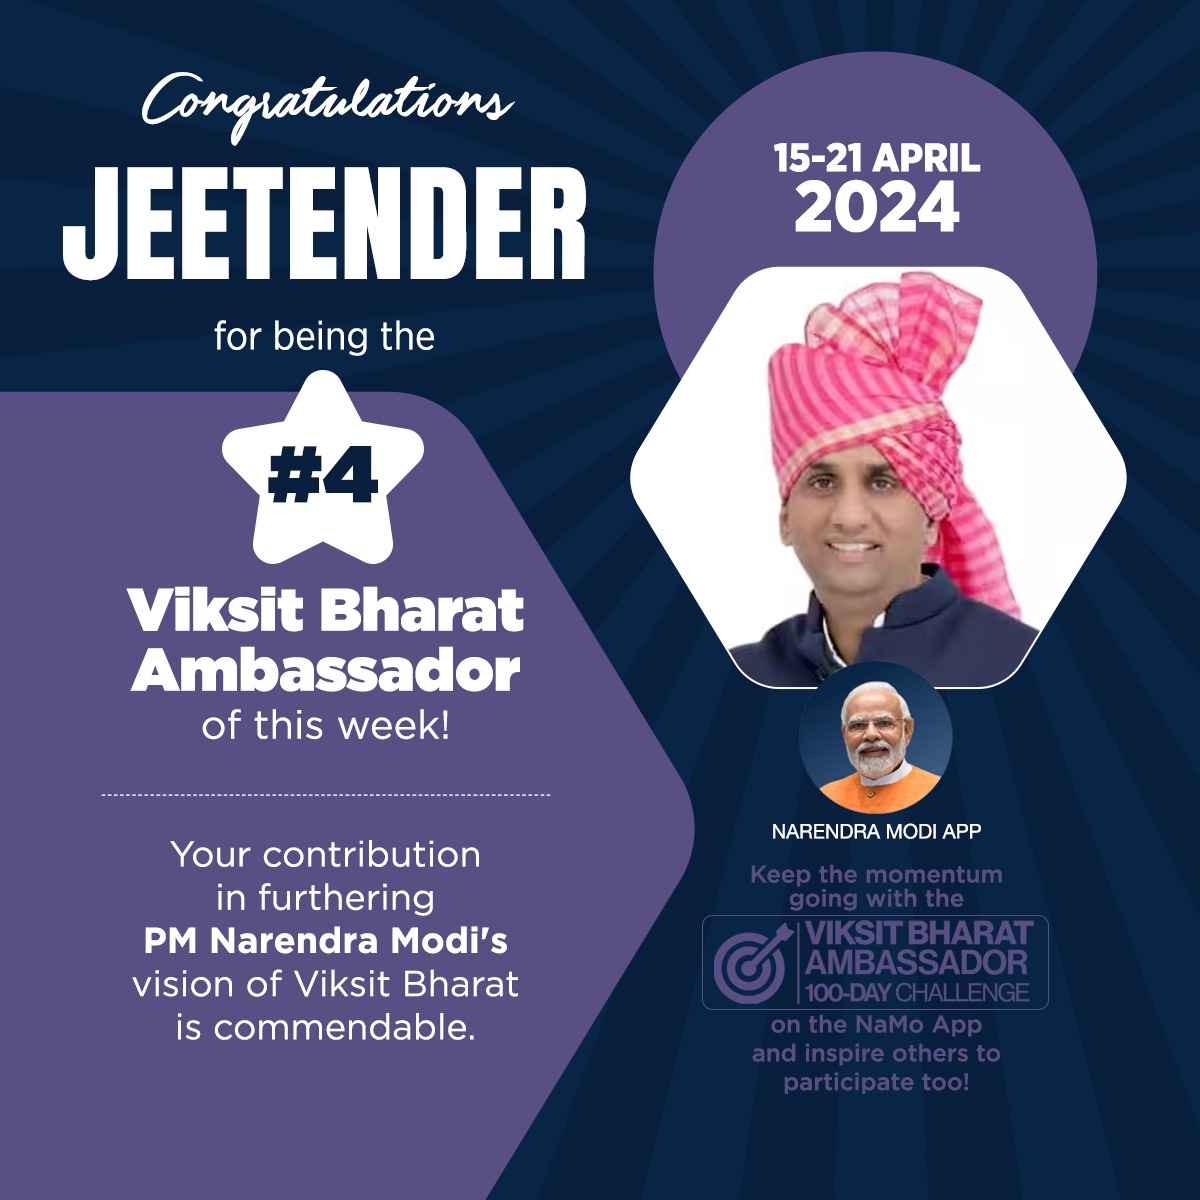 Congratulations to @jitendrabjp91 for achieving the 4th position as a #ViksitBharatAmbassador this week! Engage in the 100-day challenge to uphold PM @narendramodi's vision of a developed India, and stand a chance to win exclusive incentives plus an opportunity to meet PM Modi.